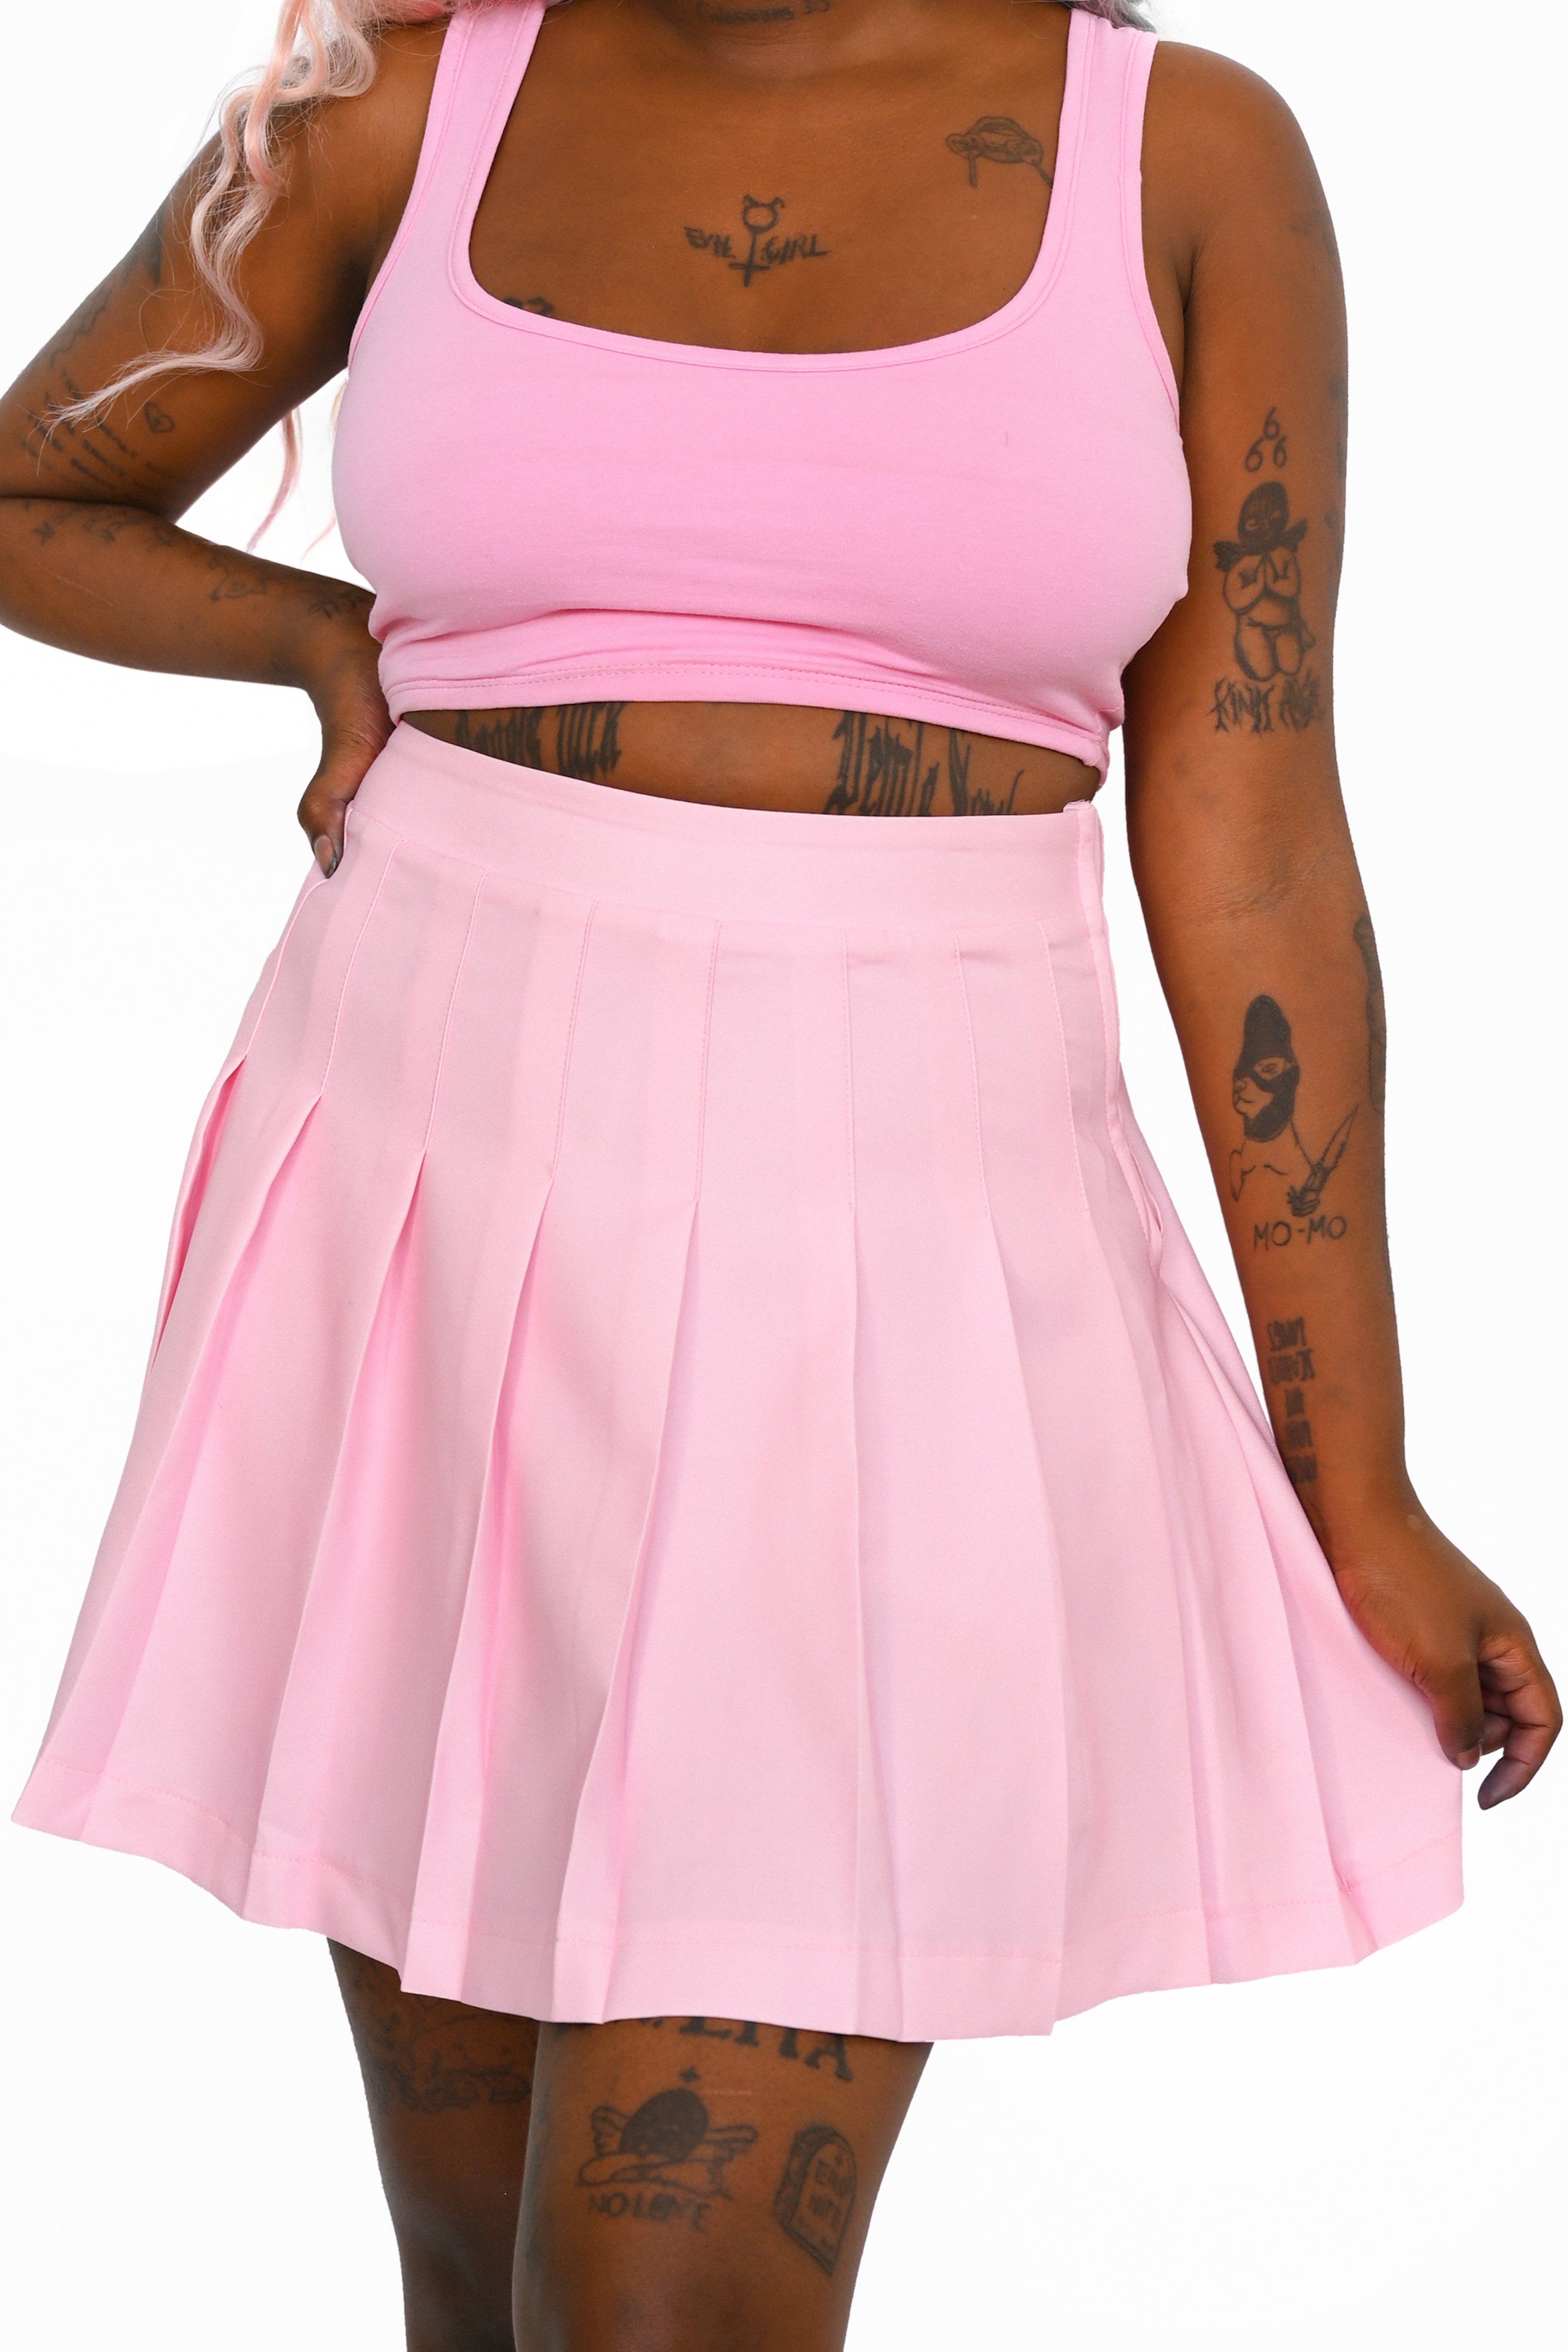 Pink pleated skirt with side zipper and built in safety shorts